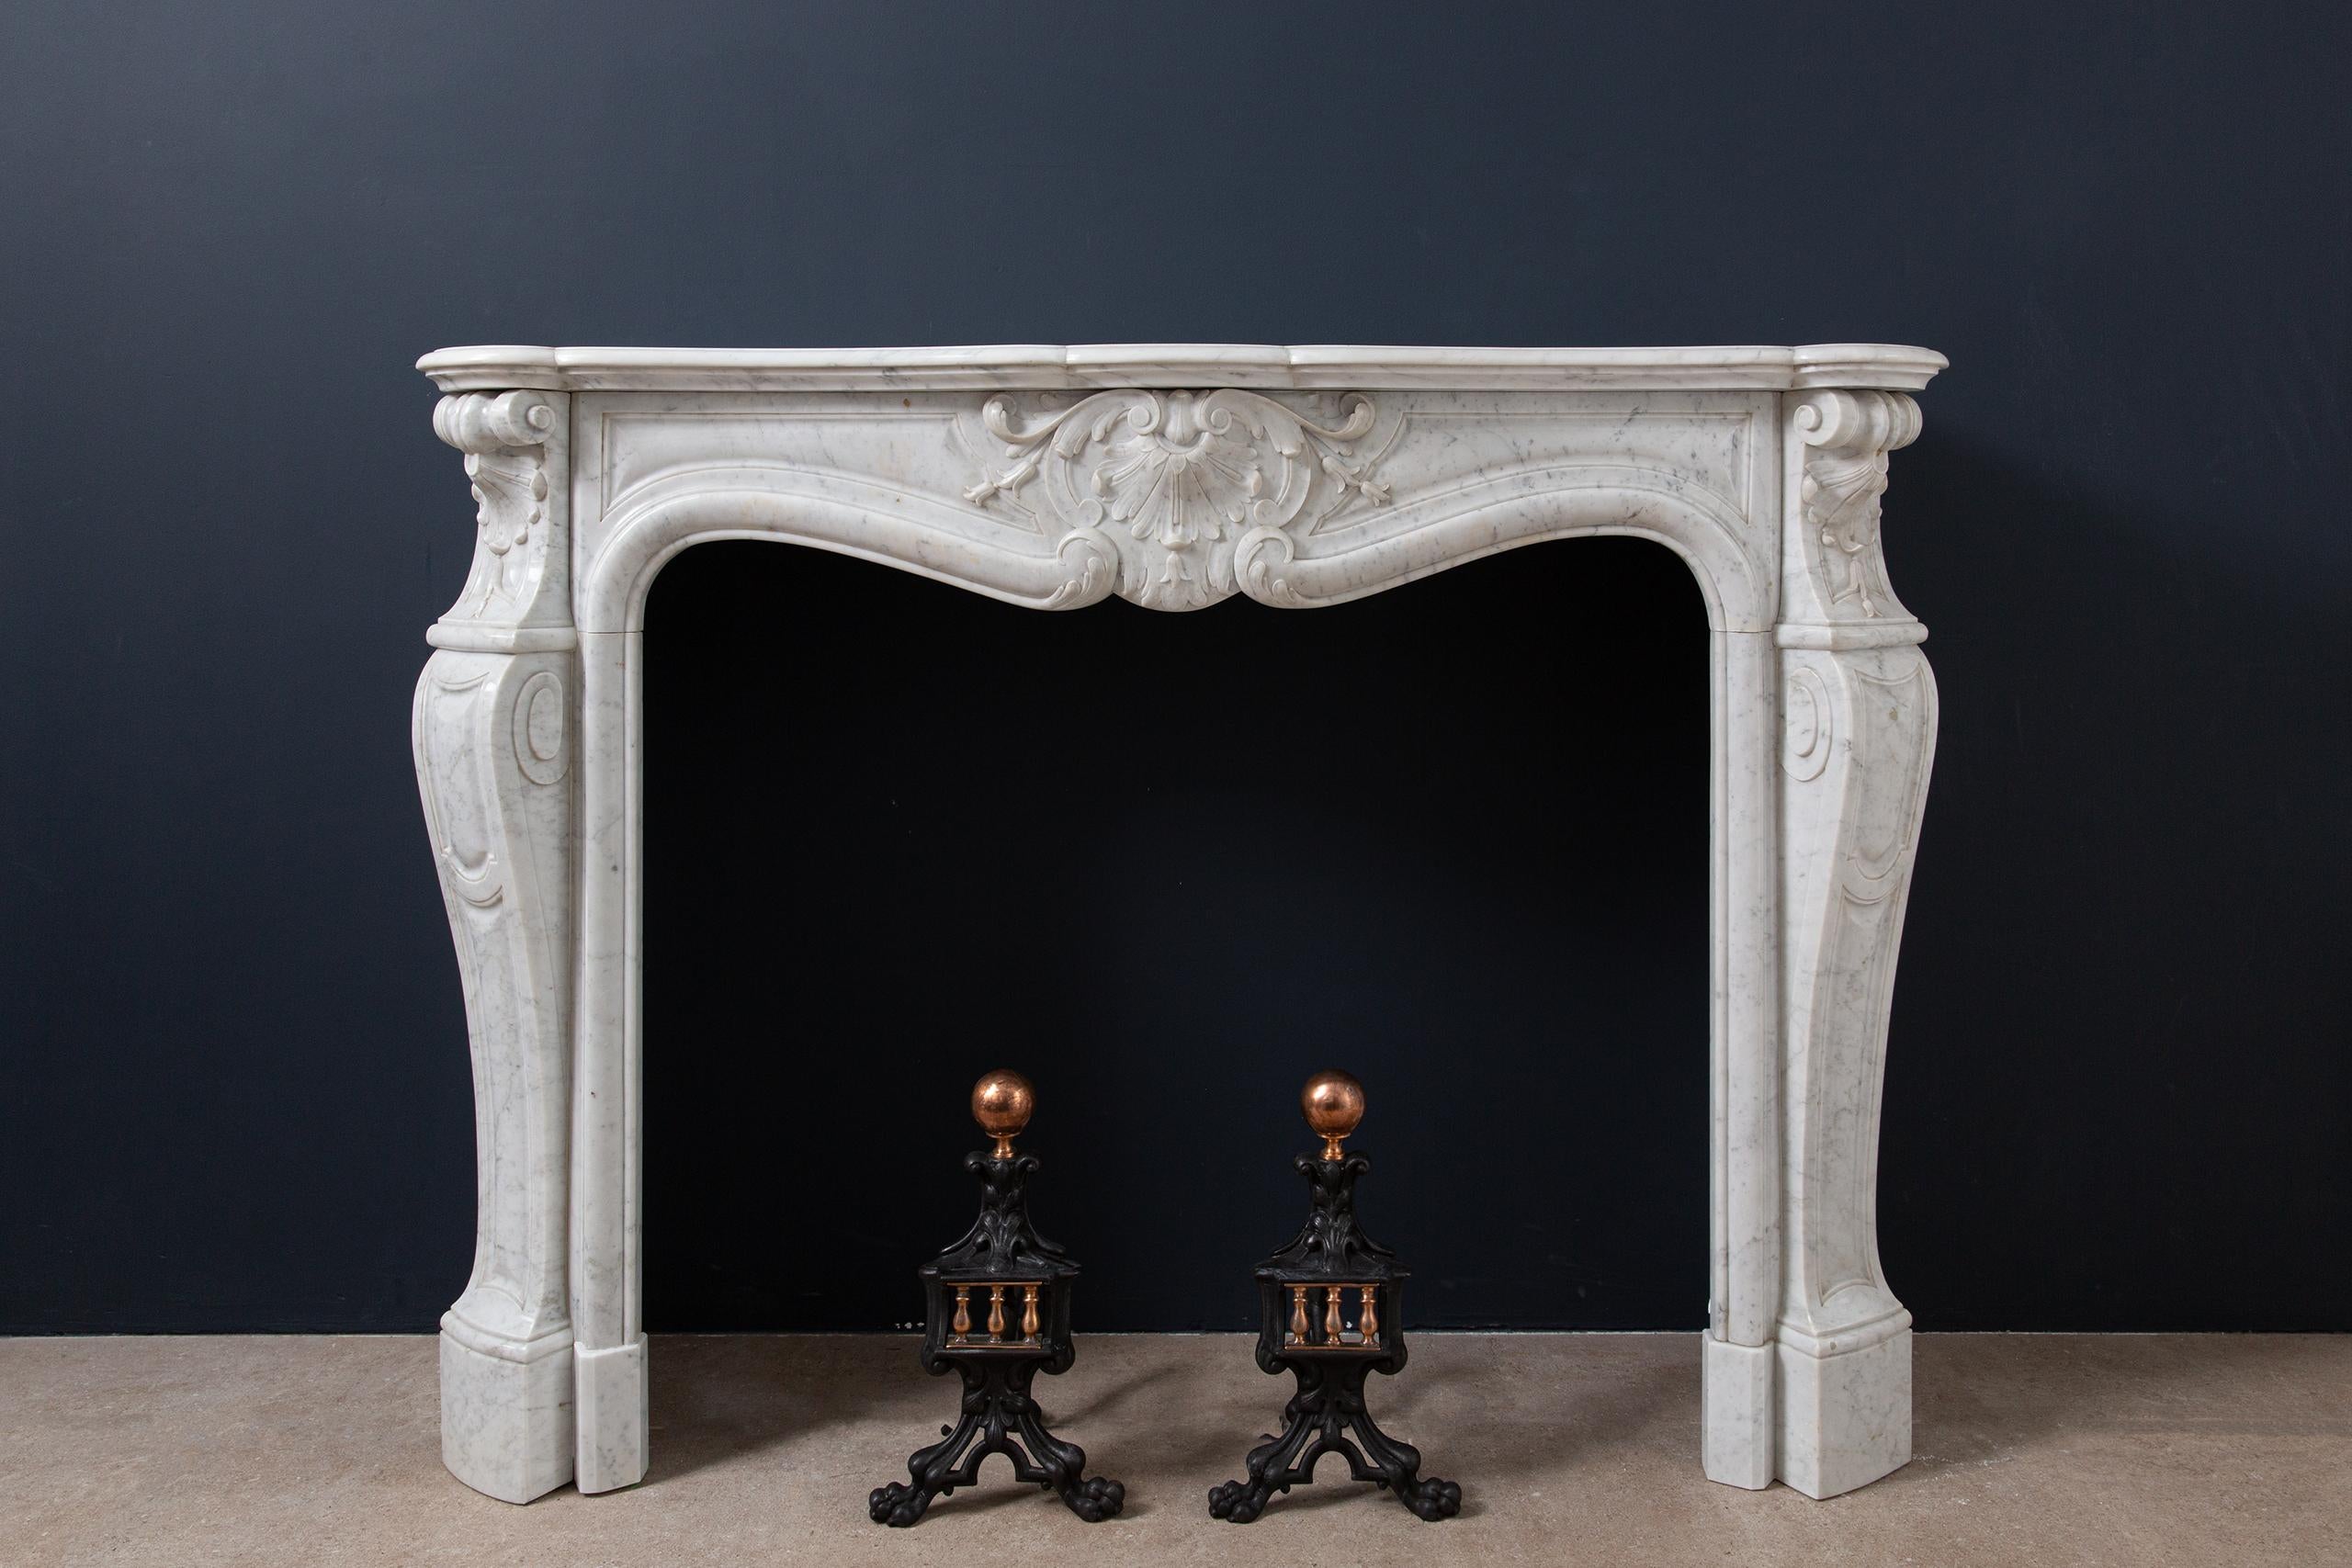 A beautiful antique fireplace in the typical Louis XV style, made of Carrara marble. With their French origin, these types of fireplaces are also called “trois coquille” fireplaces. The three cut shells spread over the linear width at the top of the